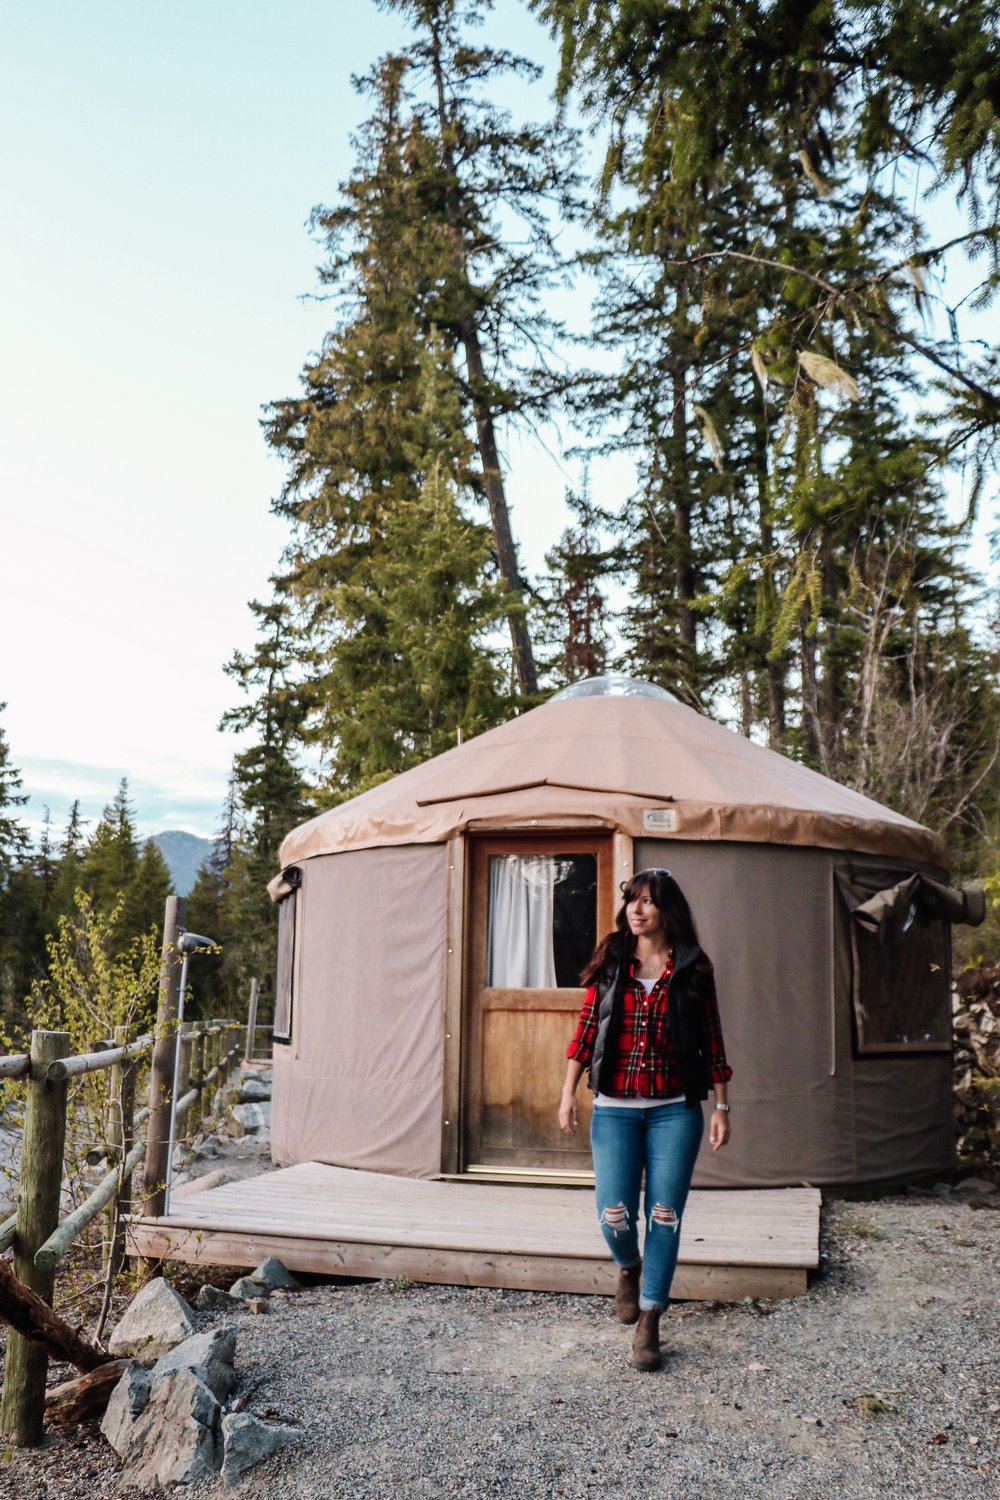 Glamping luxury camping in a yurt in Whistler BC Canada